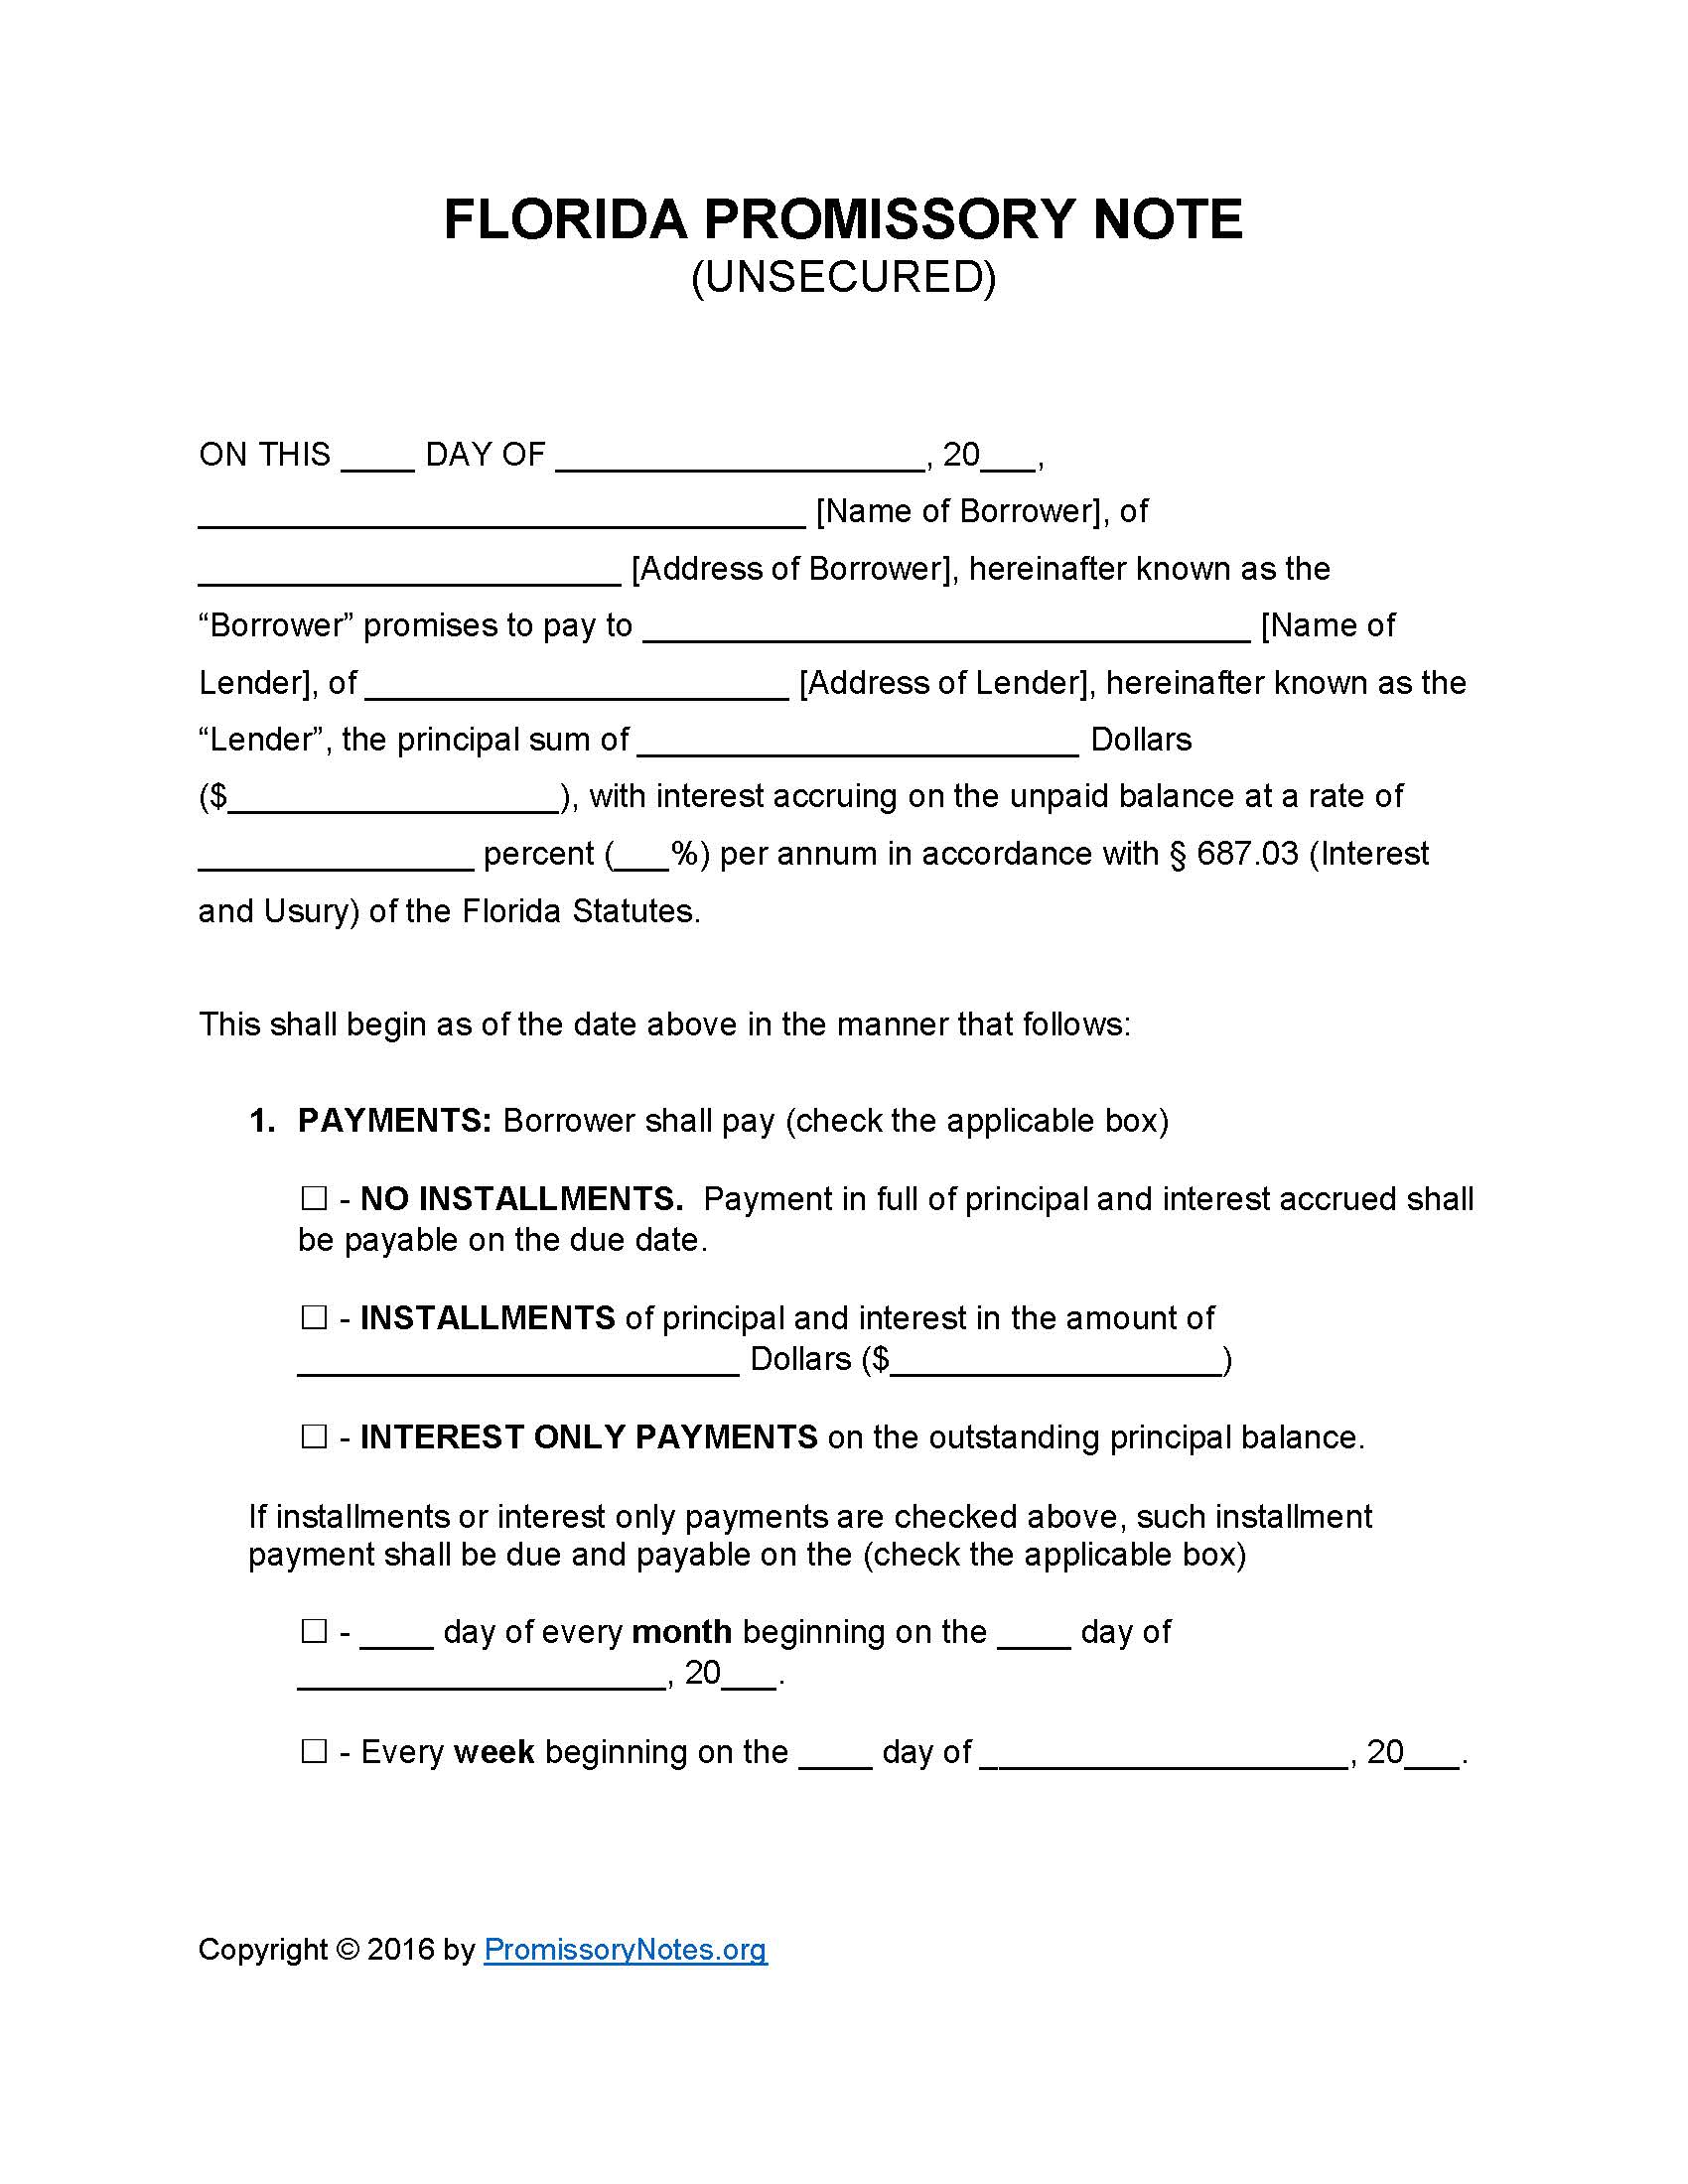 florida-unsecured-promissory-note-form